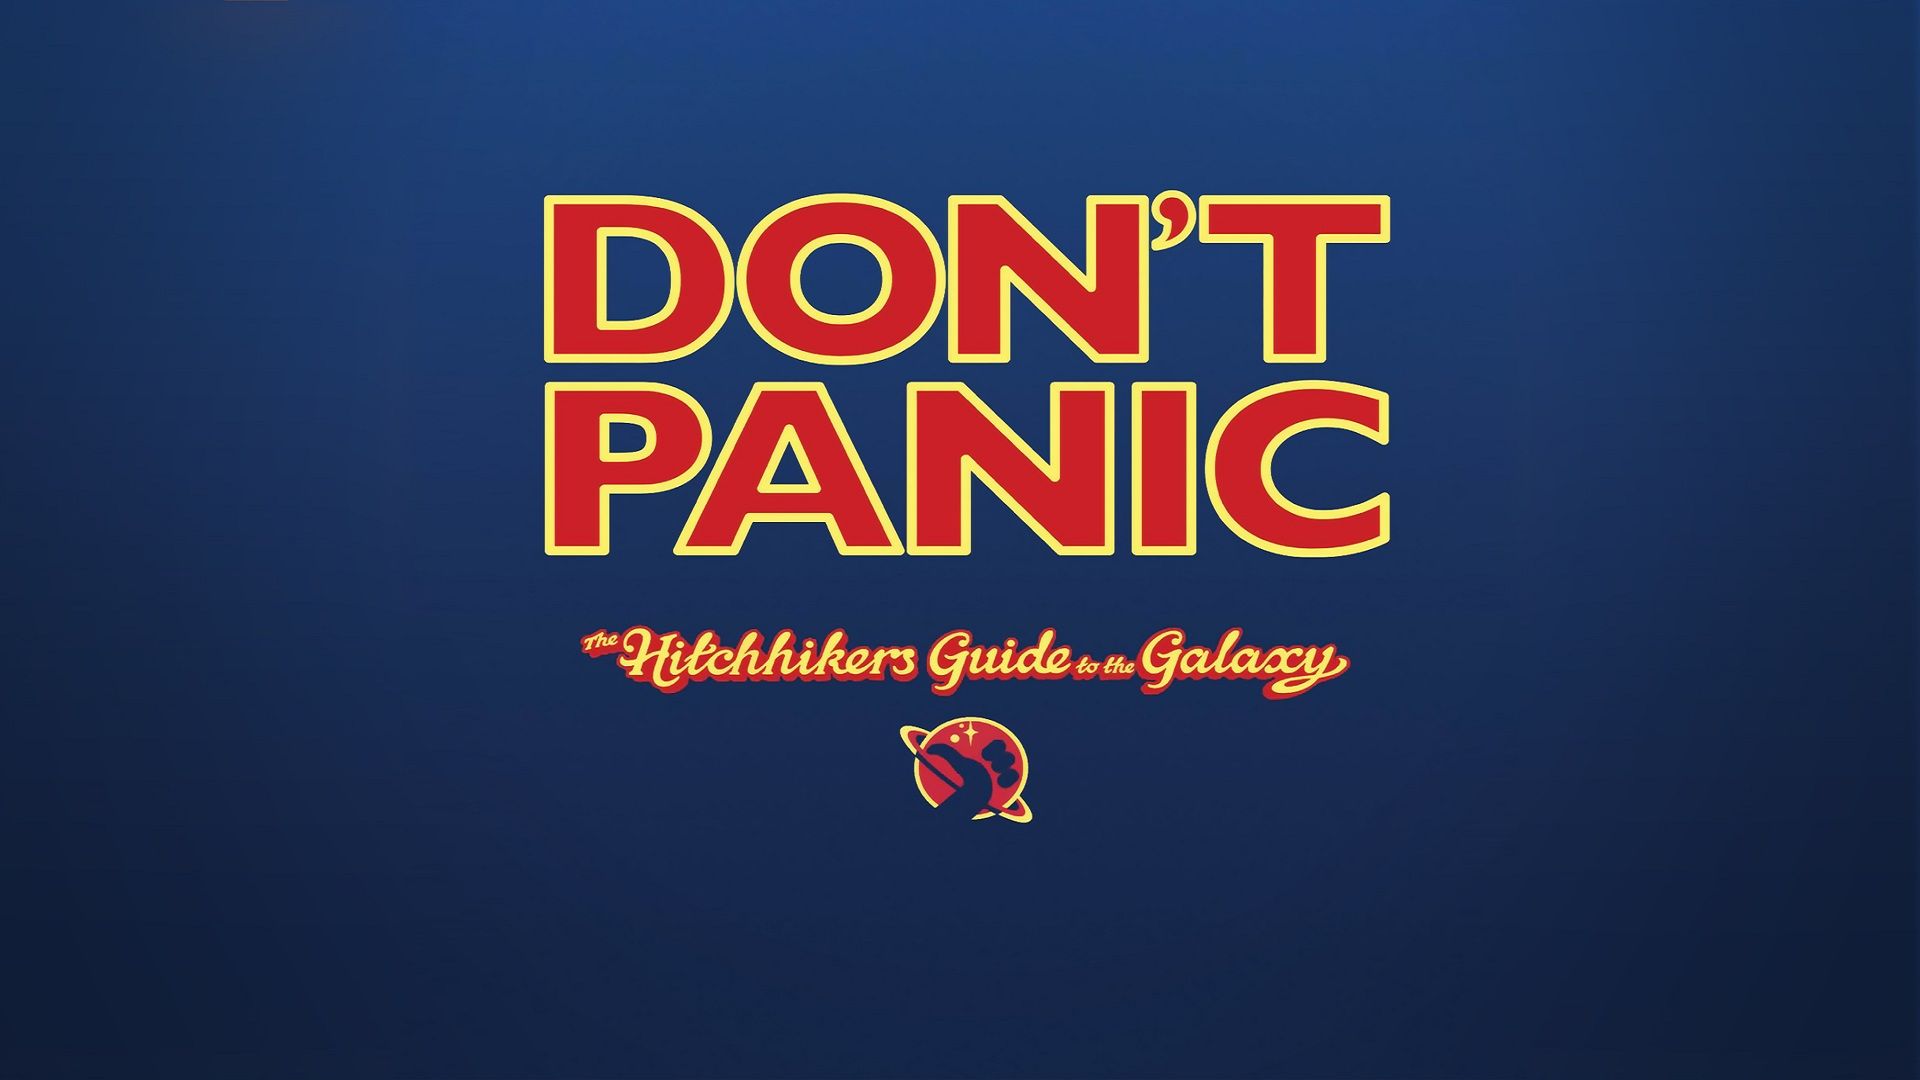 Kibble Chaos: What to do when the fear mongers come out. Hitchhikers guide to the galaxy, Guide to the galaxy, Hitchhikers guide